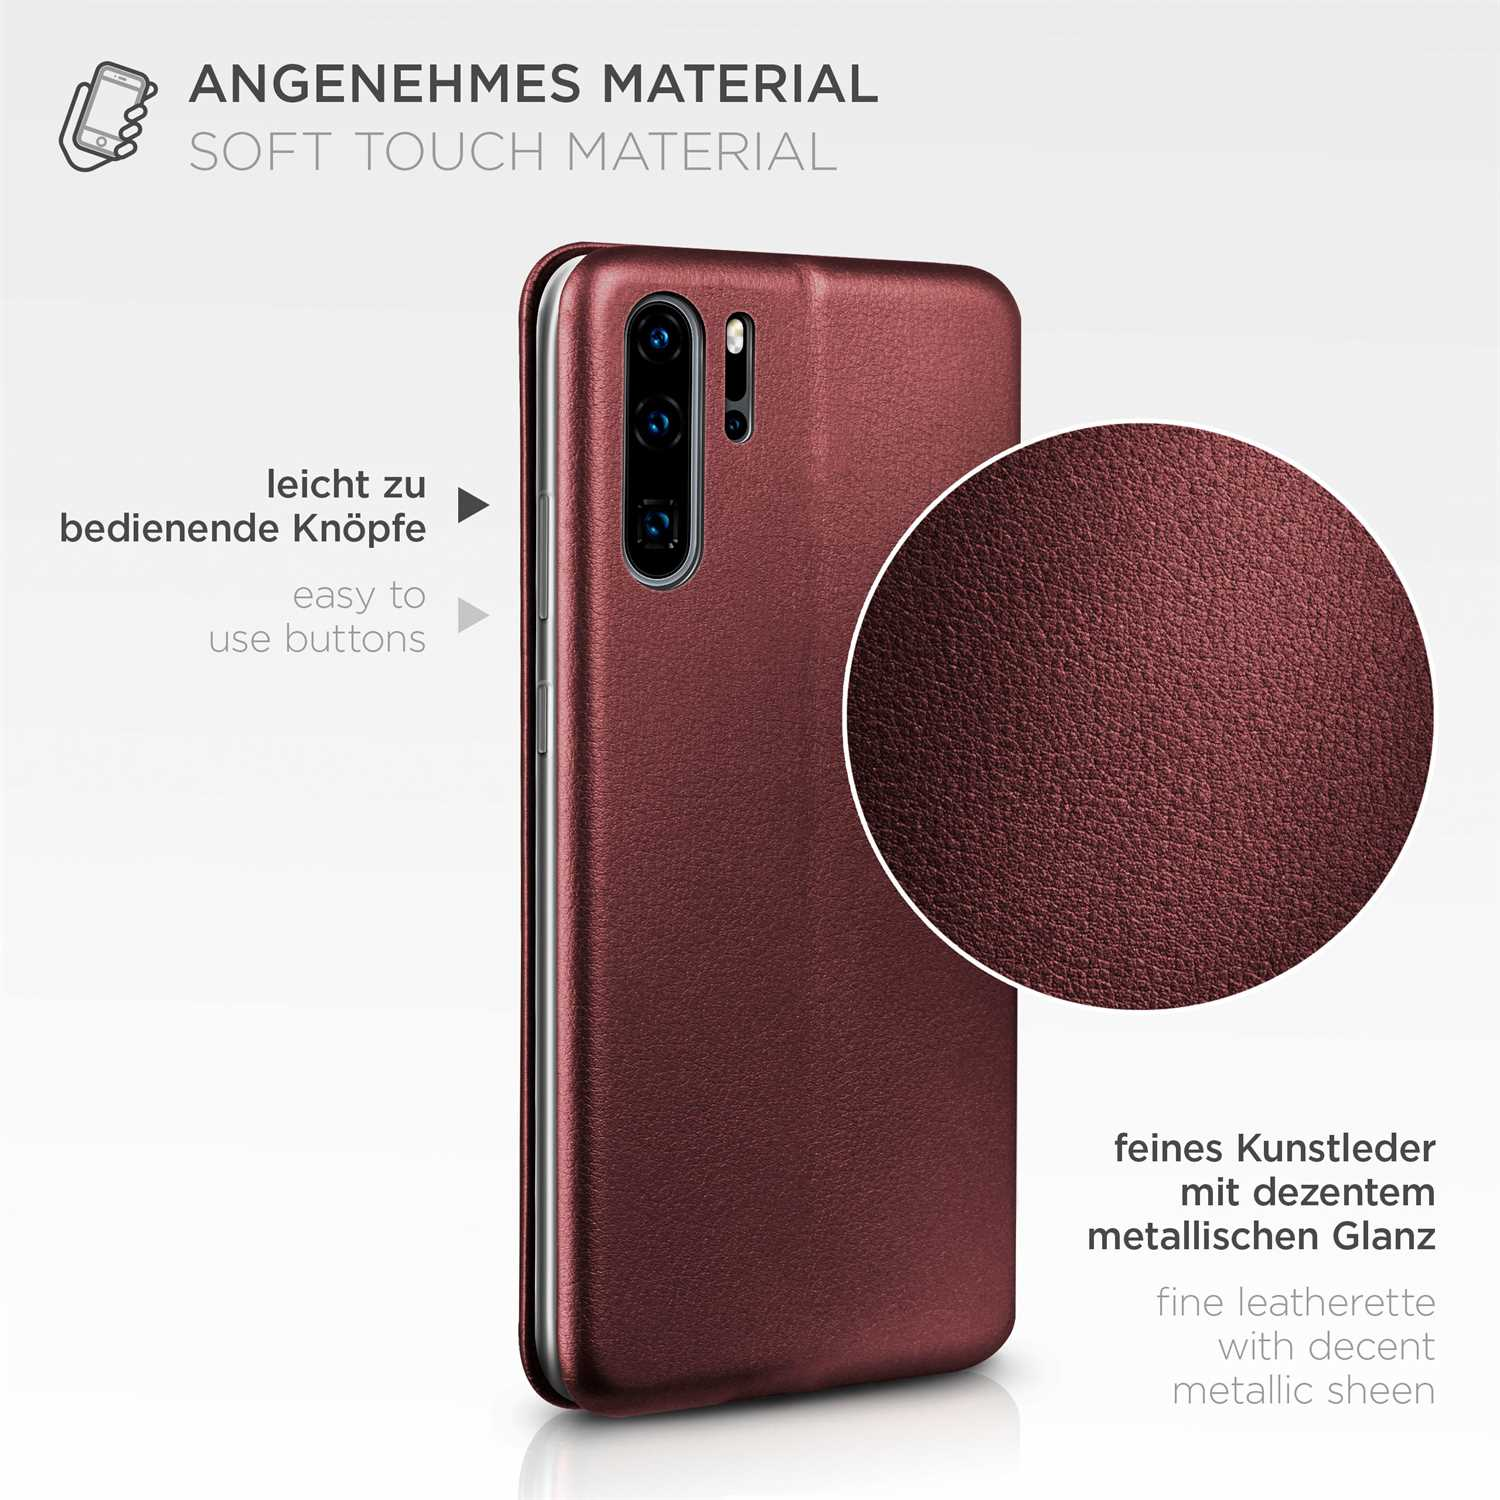 Pro P30 - Case, Edition, New Huawei, ONEFLOW Business Flip Cover, Burgund Red